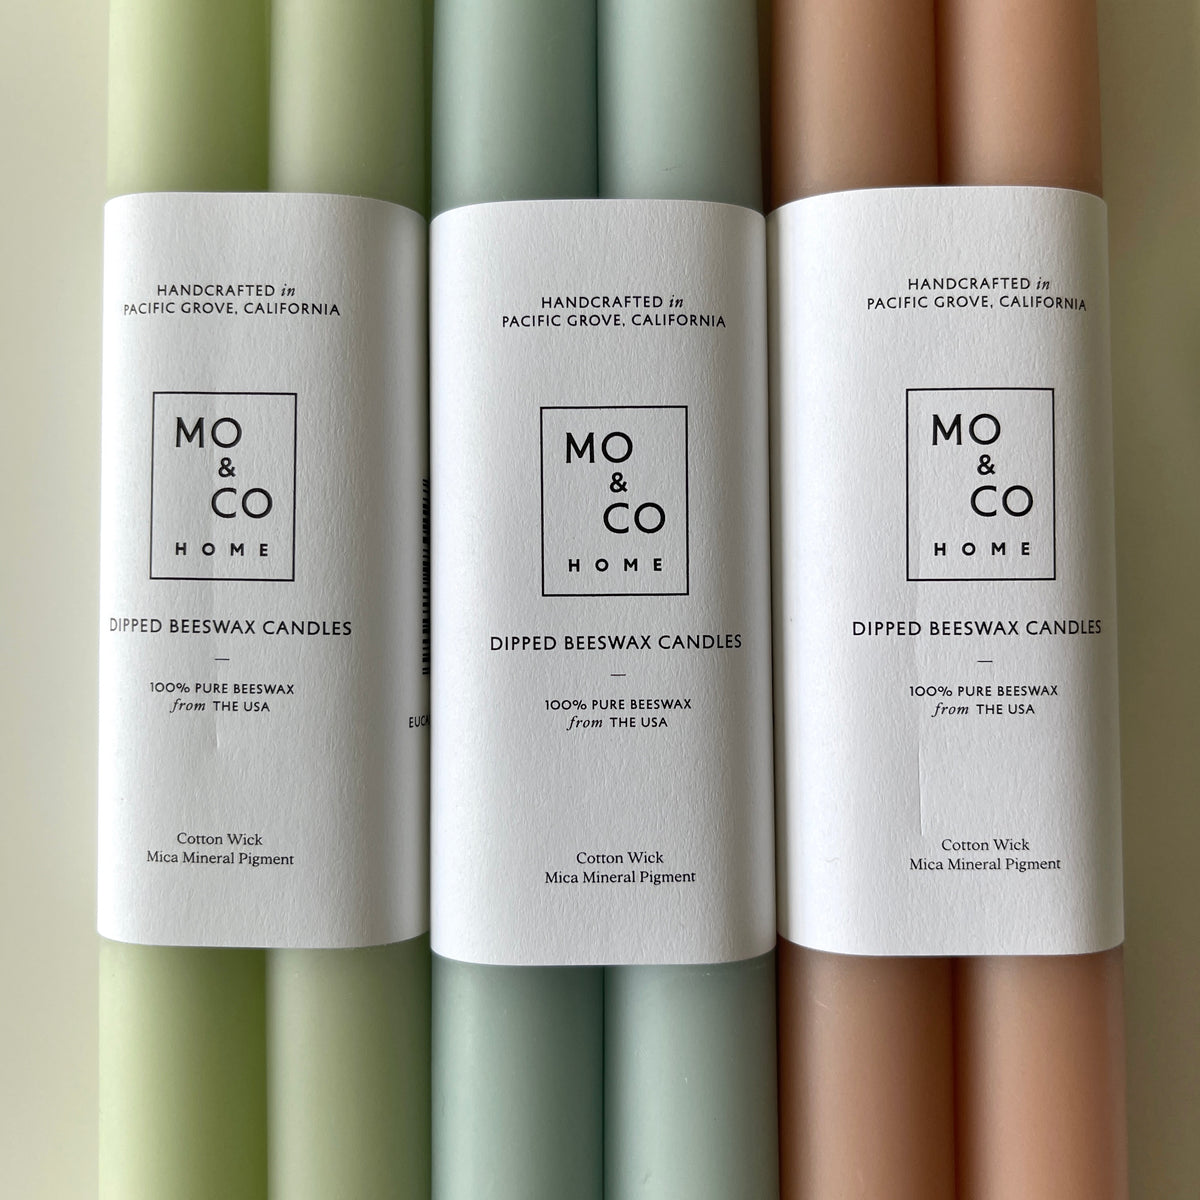 [Mo&Co Home] Beeswax Dipped Candles